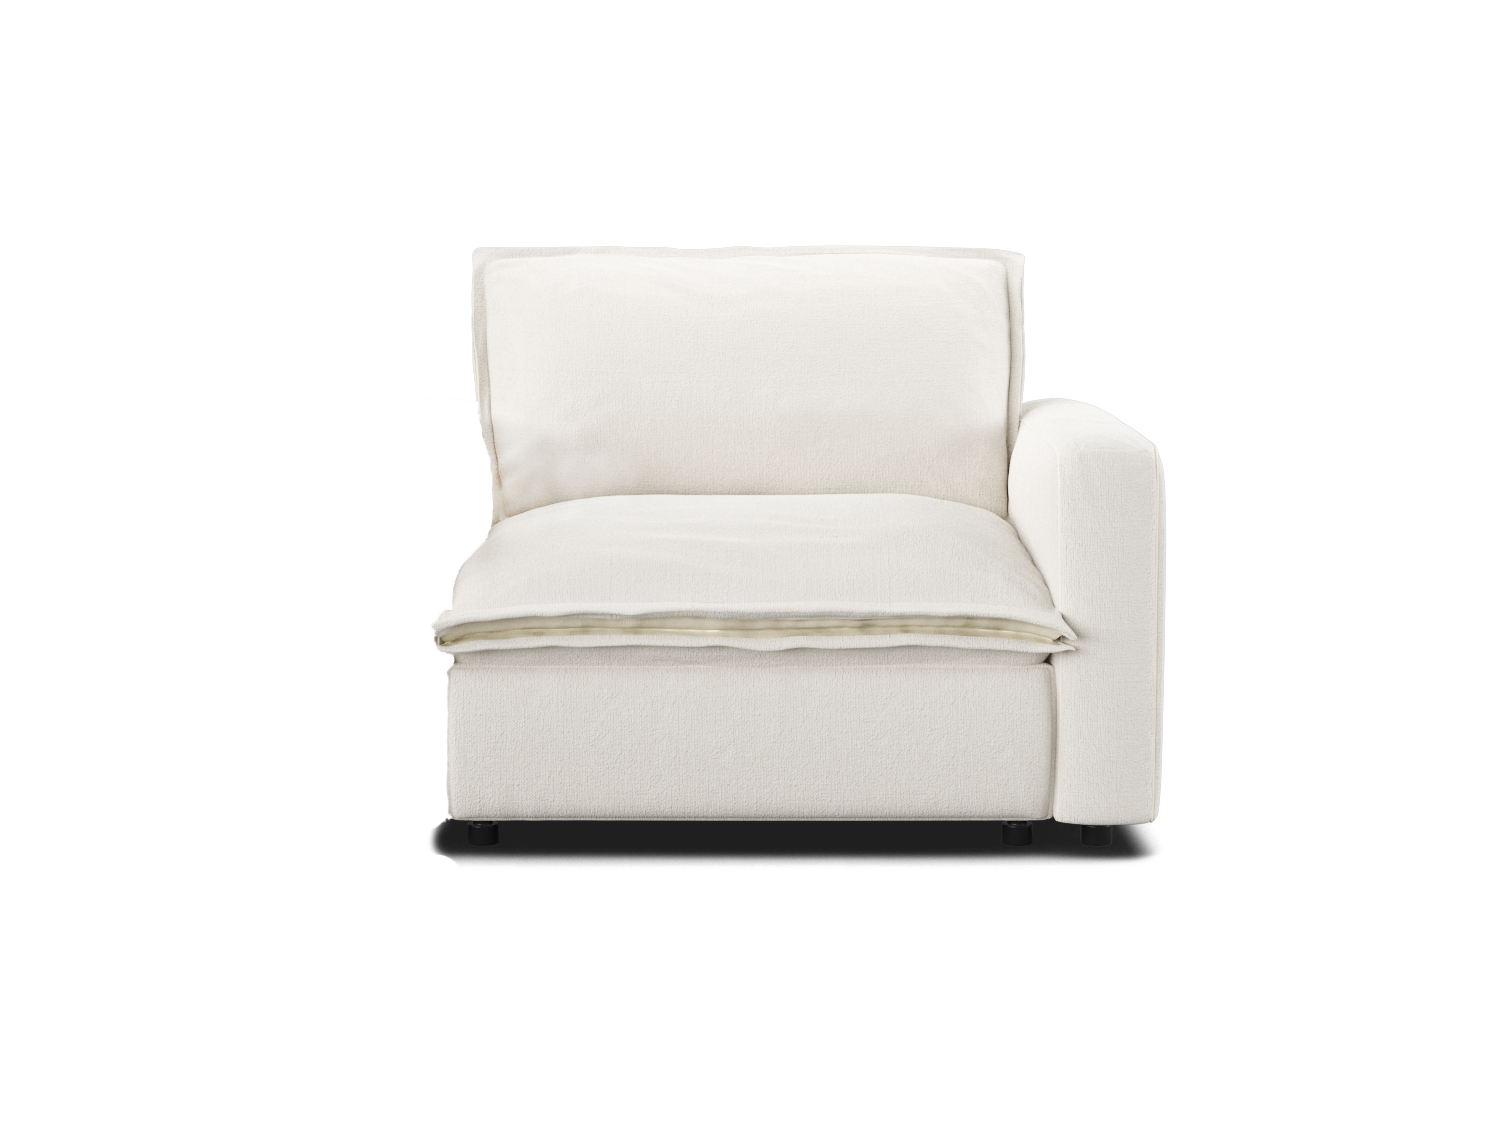 Modular couch piece: right corner seat in white linen